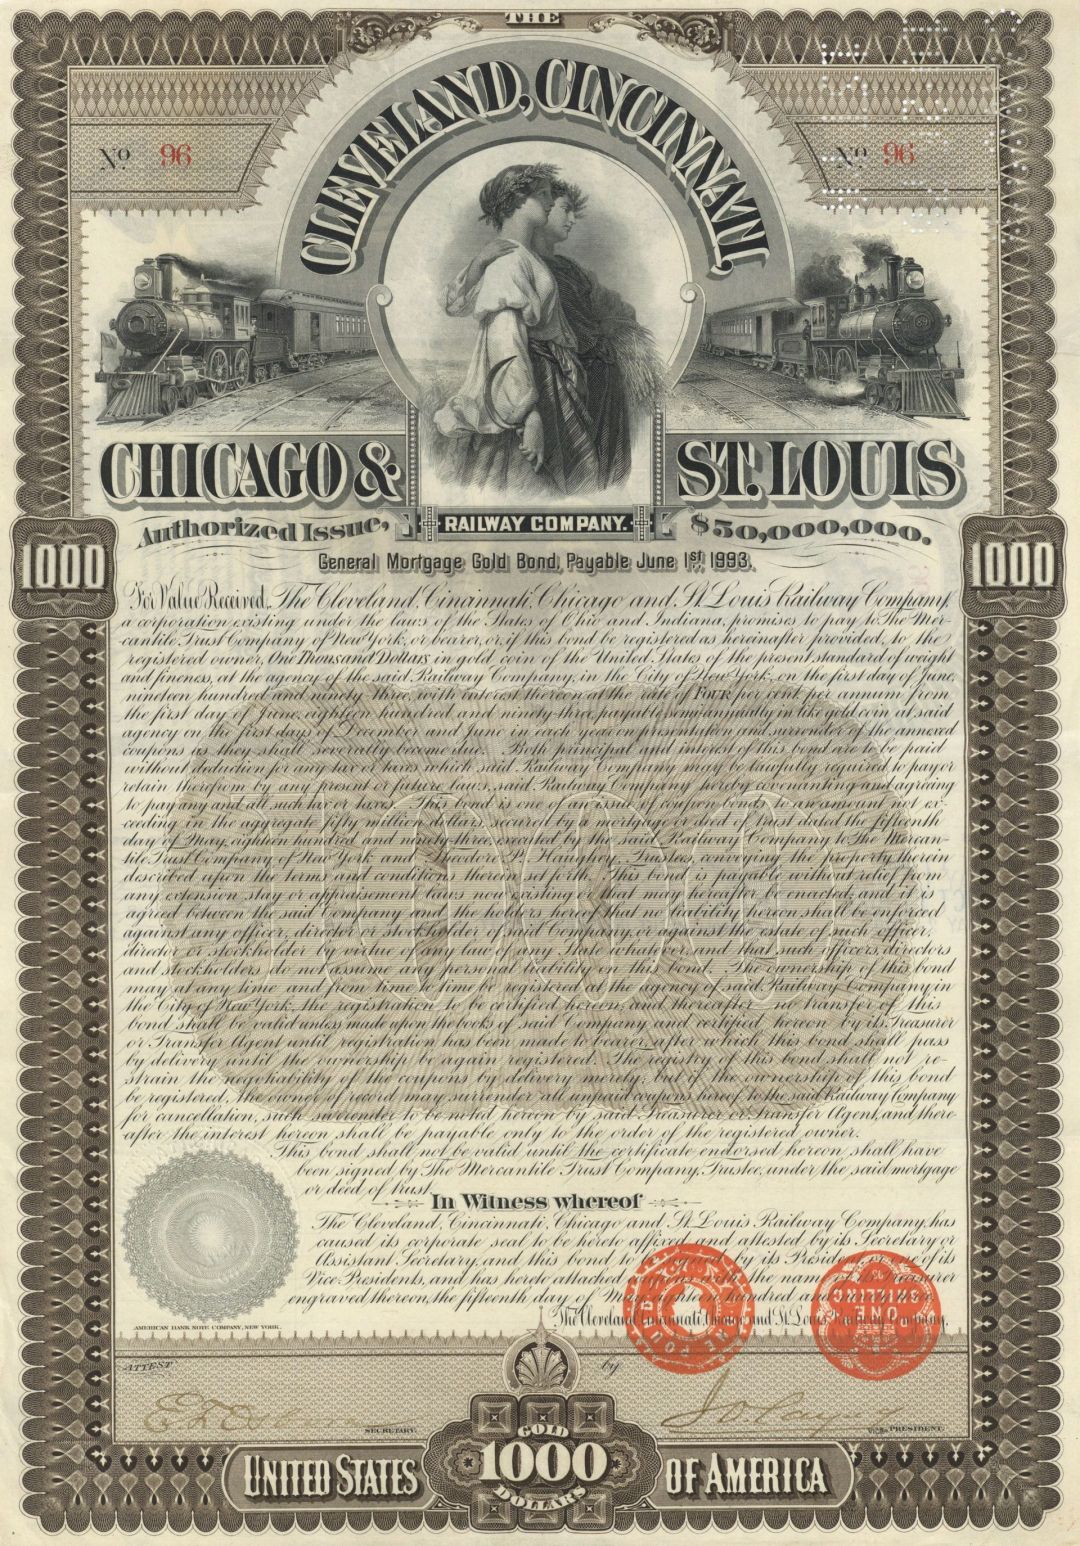 Cleveland, Cincinnati, Chicago and St. Louis Railway Co. - dated 1893 $1,000 Issued Railroad Bond - Also Known as the Big Four Railroad